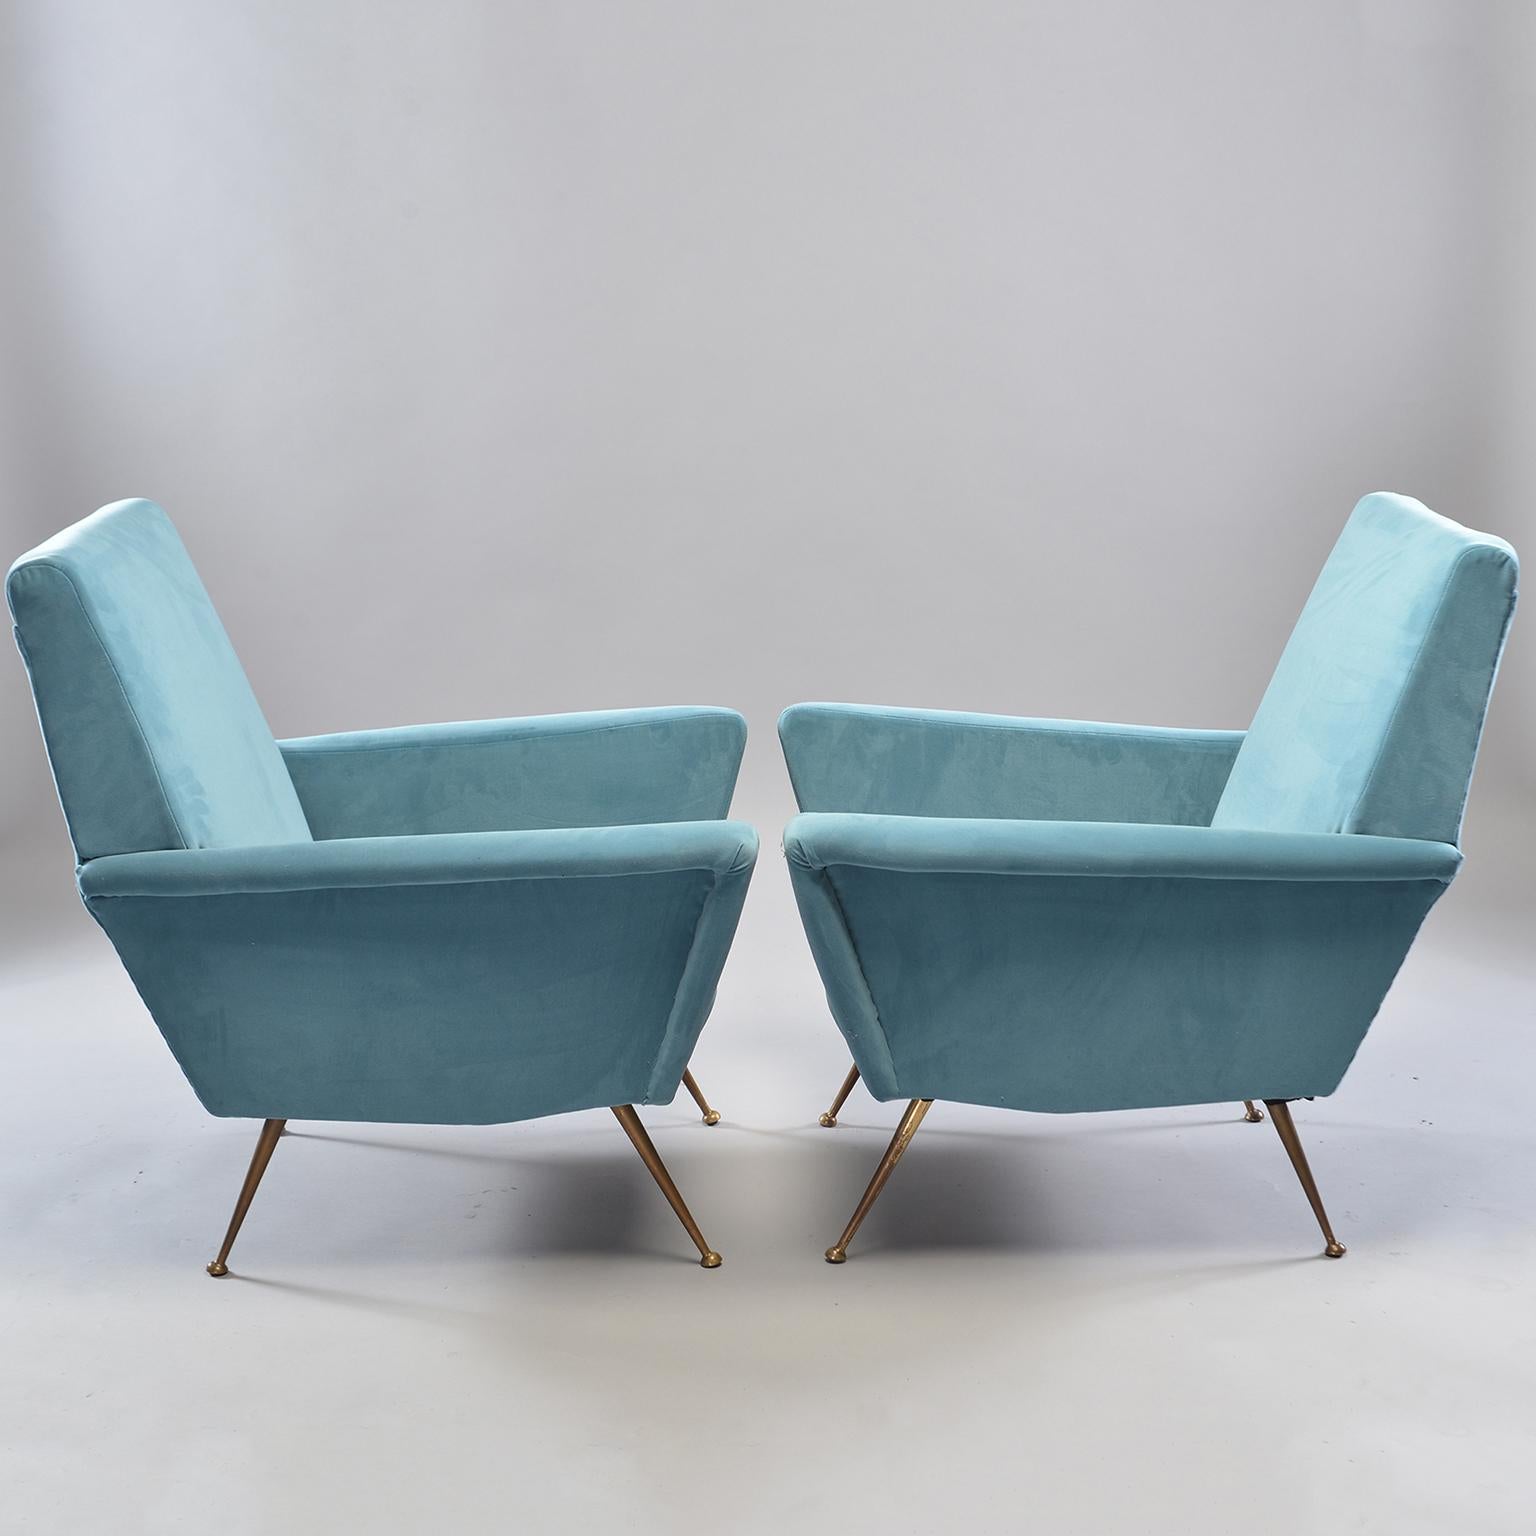 Pair of Italian midcentury armchairs with great lines, flared boxy arms and slender gold tone metal legs. Newly upholstered in Europe in a sky blue mole skin fabric. Measures: Seats are 15-3/4